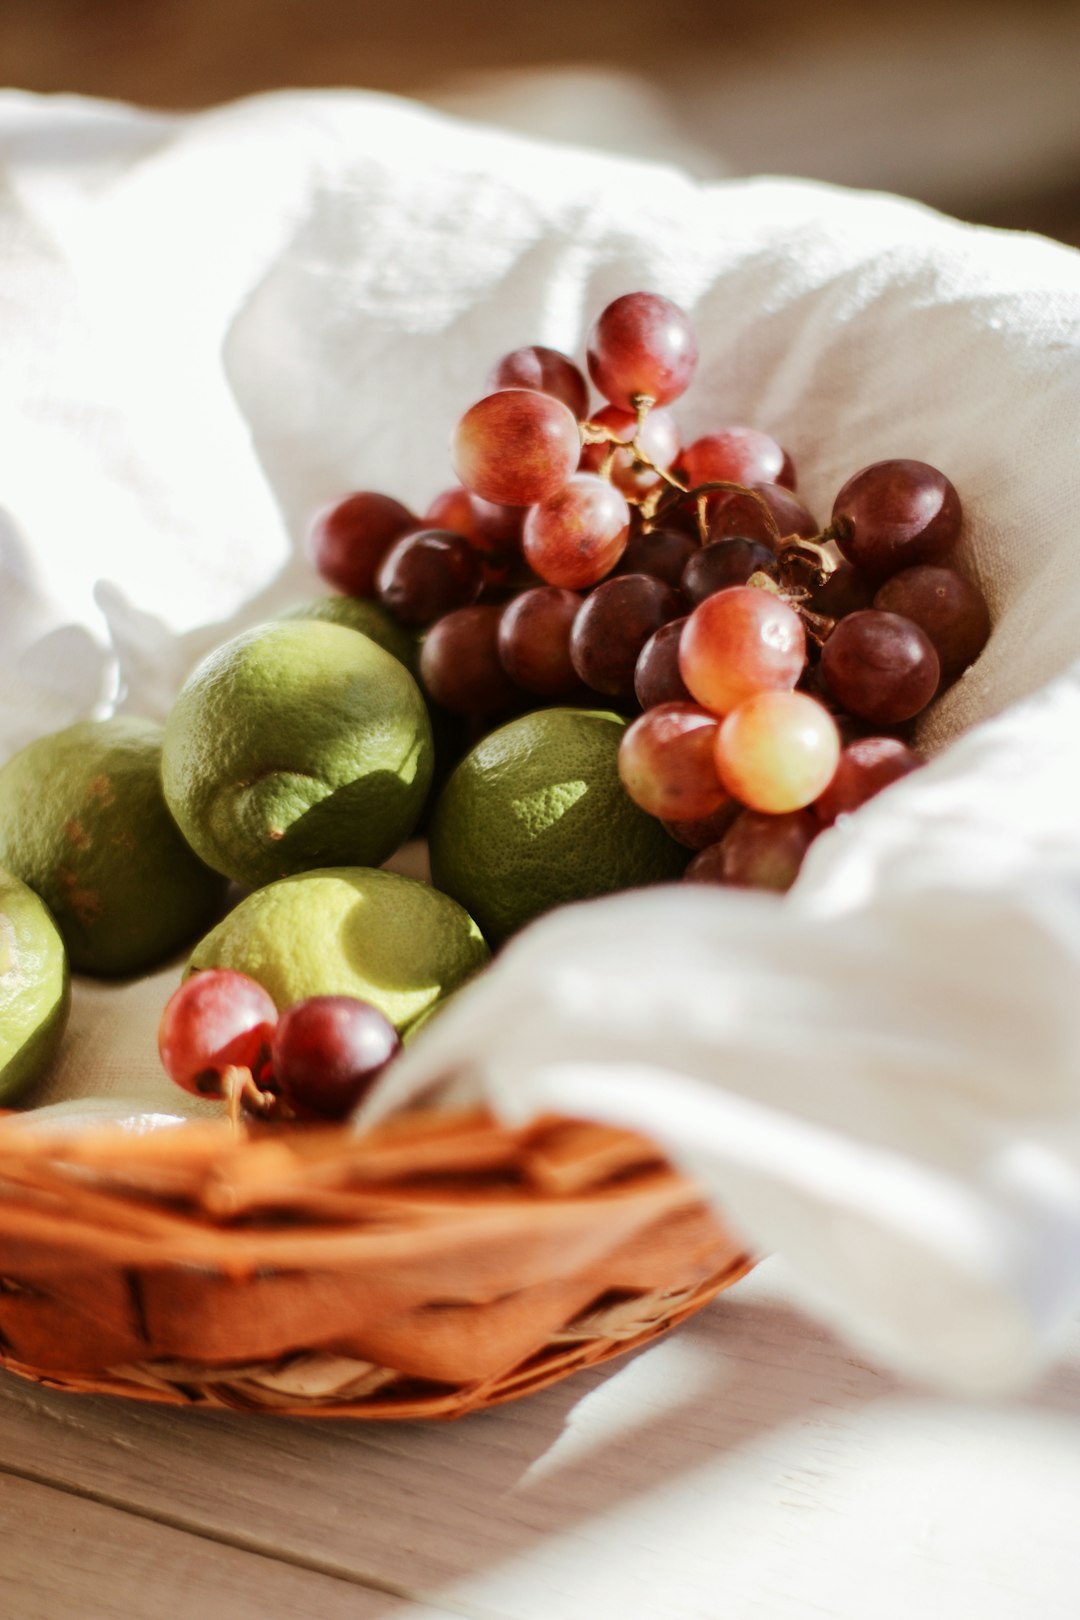 green and brown fruits on brown woven basket